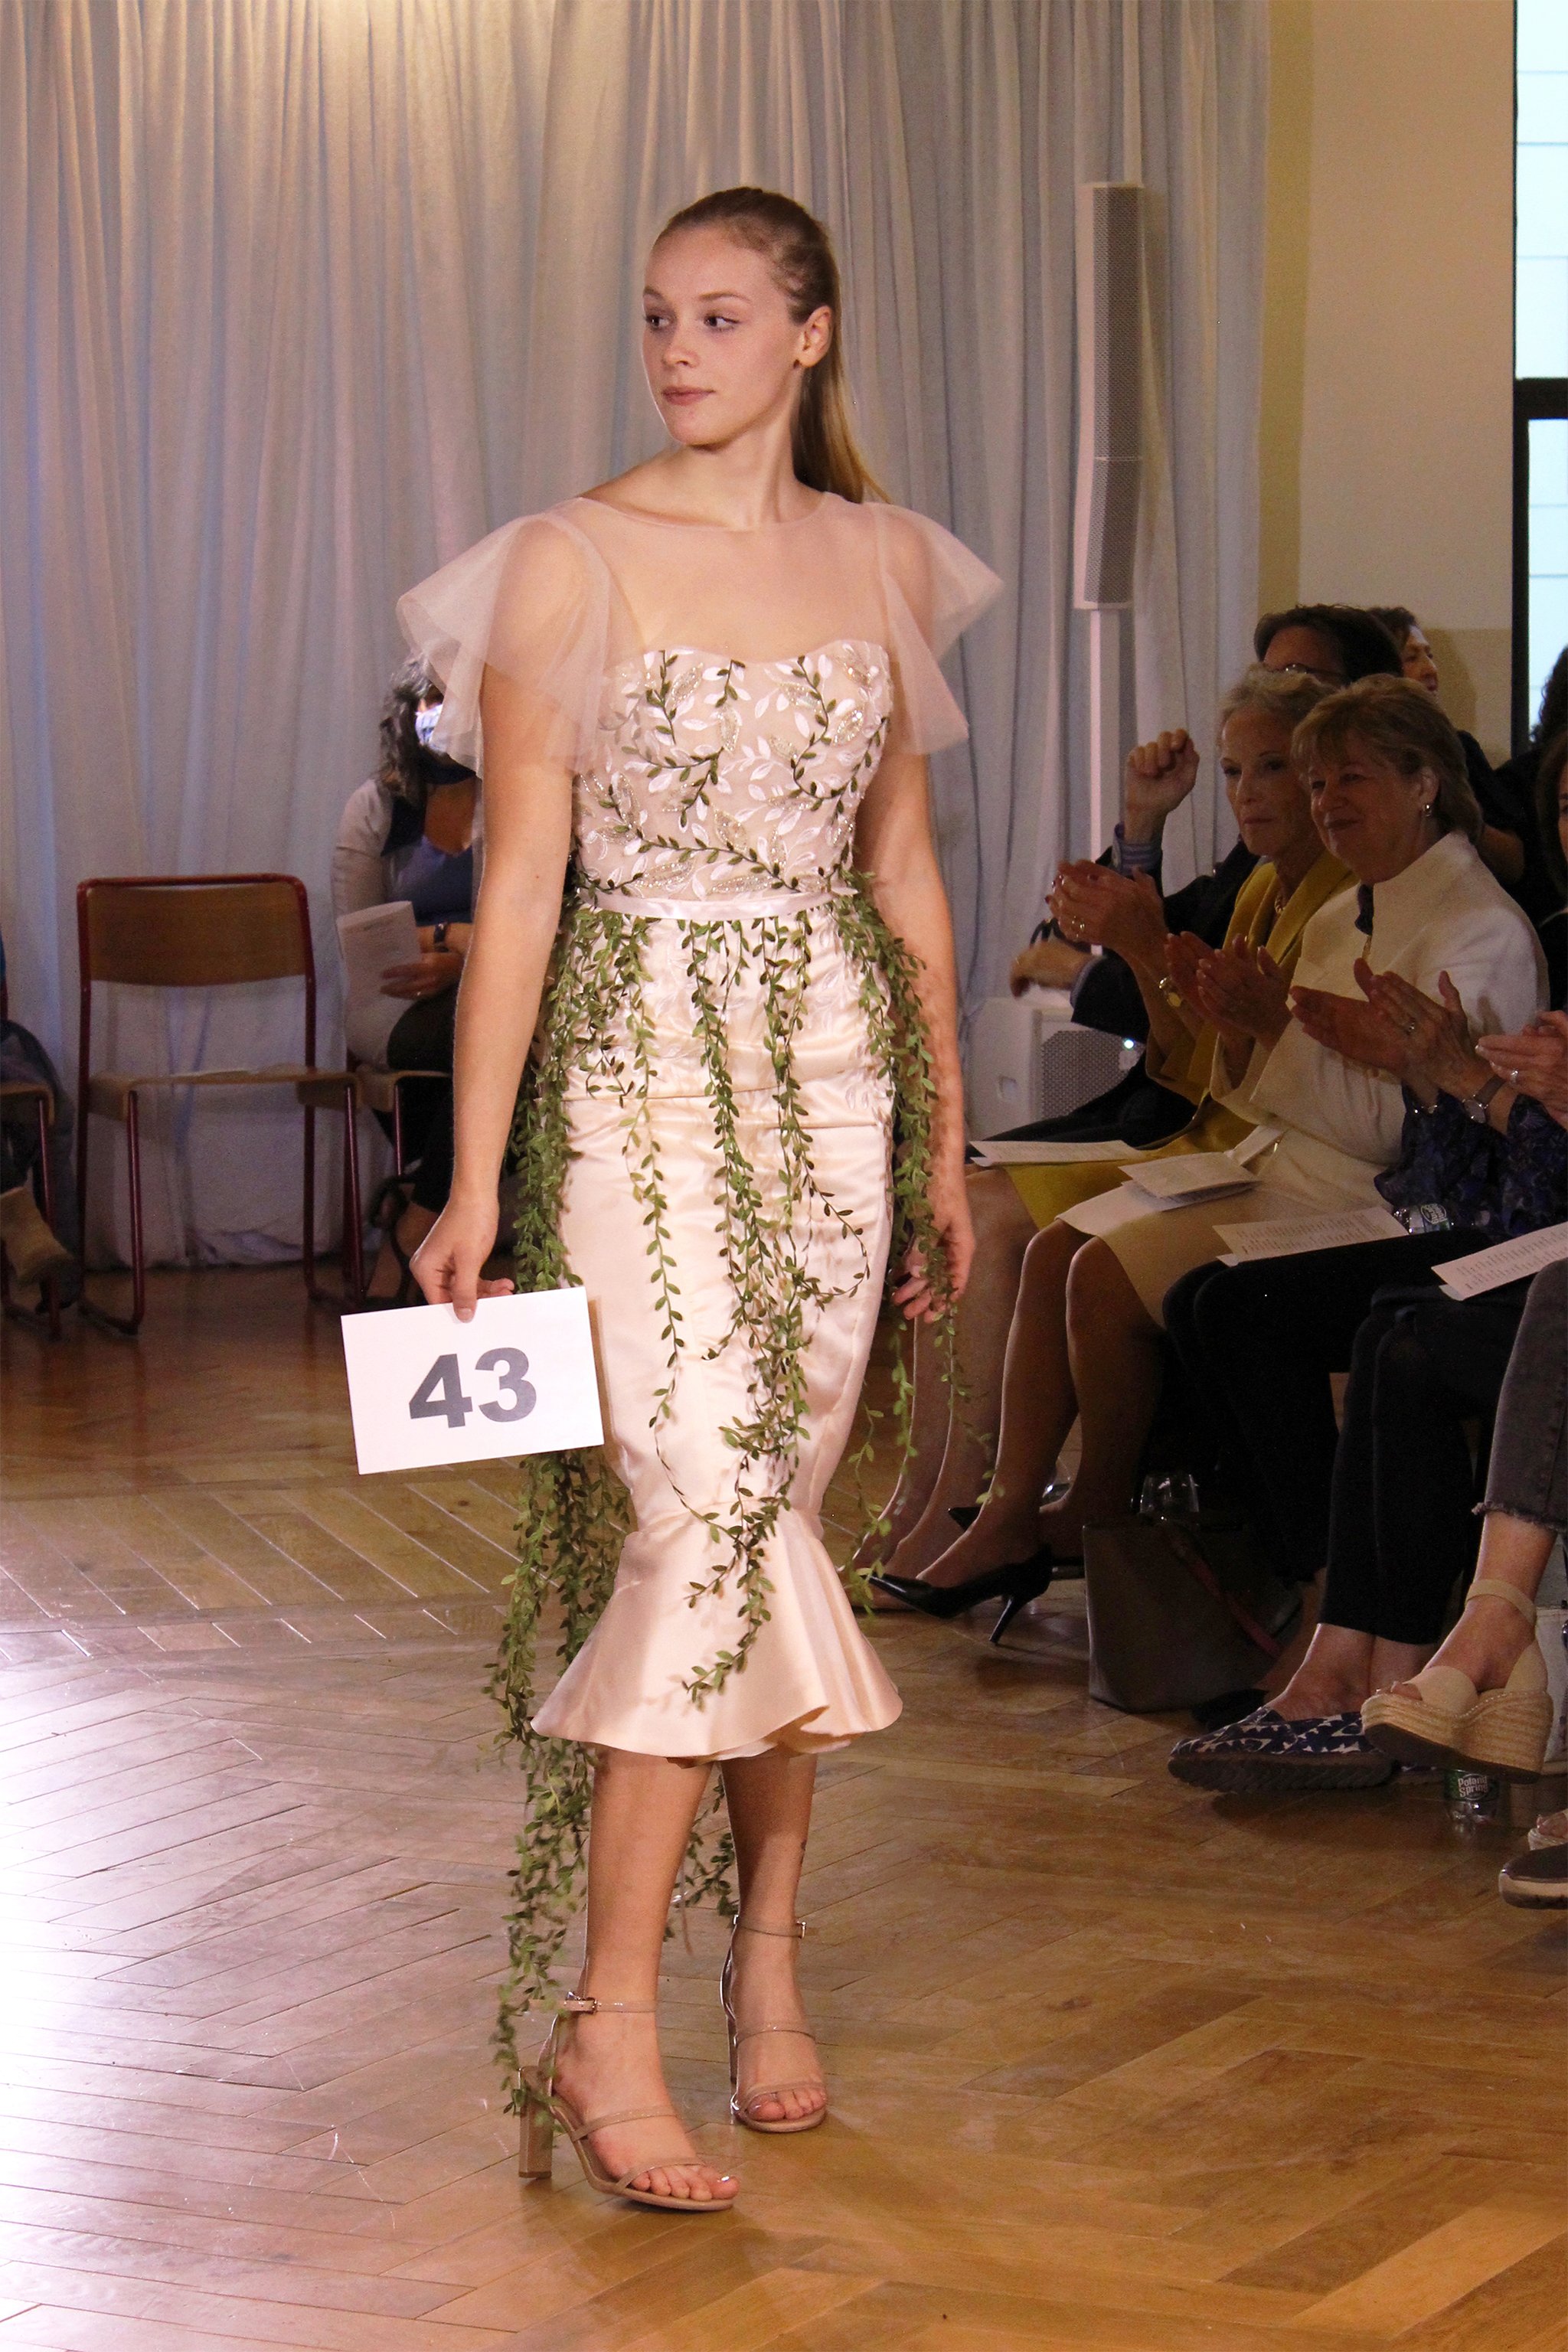 Model wearing shin-length dress with a flower and vine detail overlay.